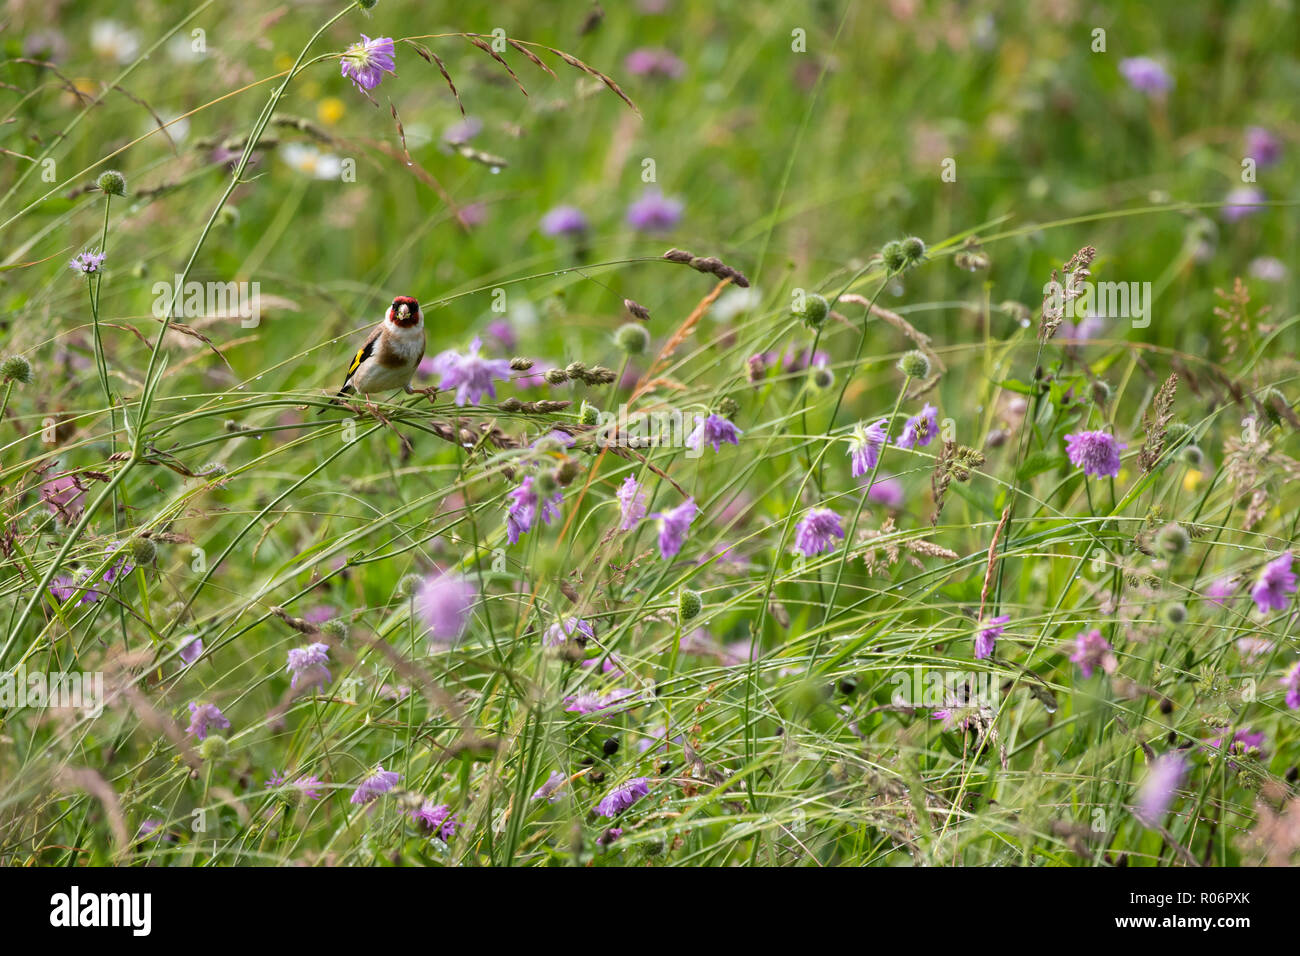 A goldfinch feeding on scabious seeds in a species rich wild flower meadow in full flower during the late spring. Taken near Bohinj, Slovenia. Stock Photo